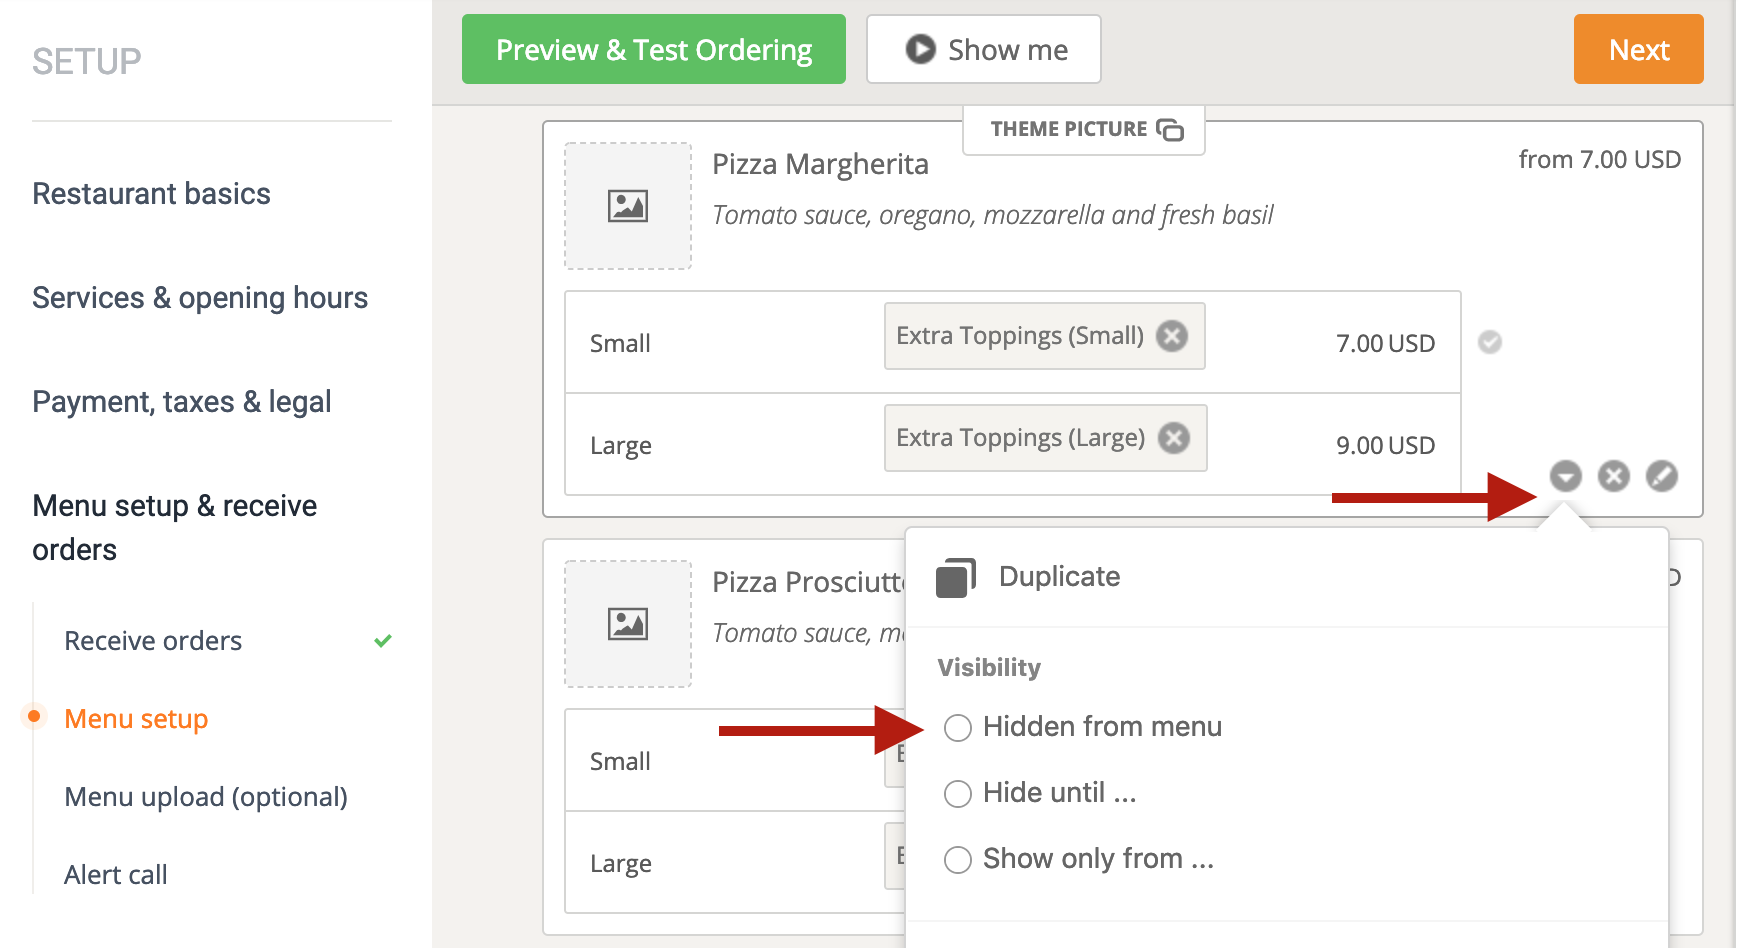 Can the restaurant modify or edit an order after being placed? 1